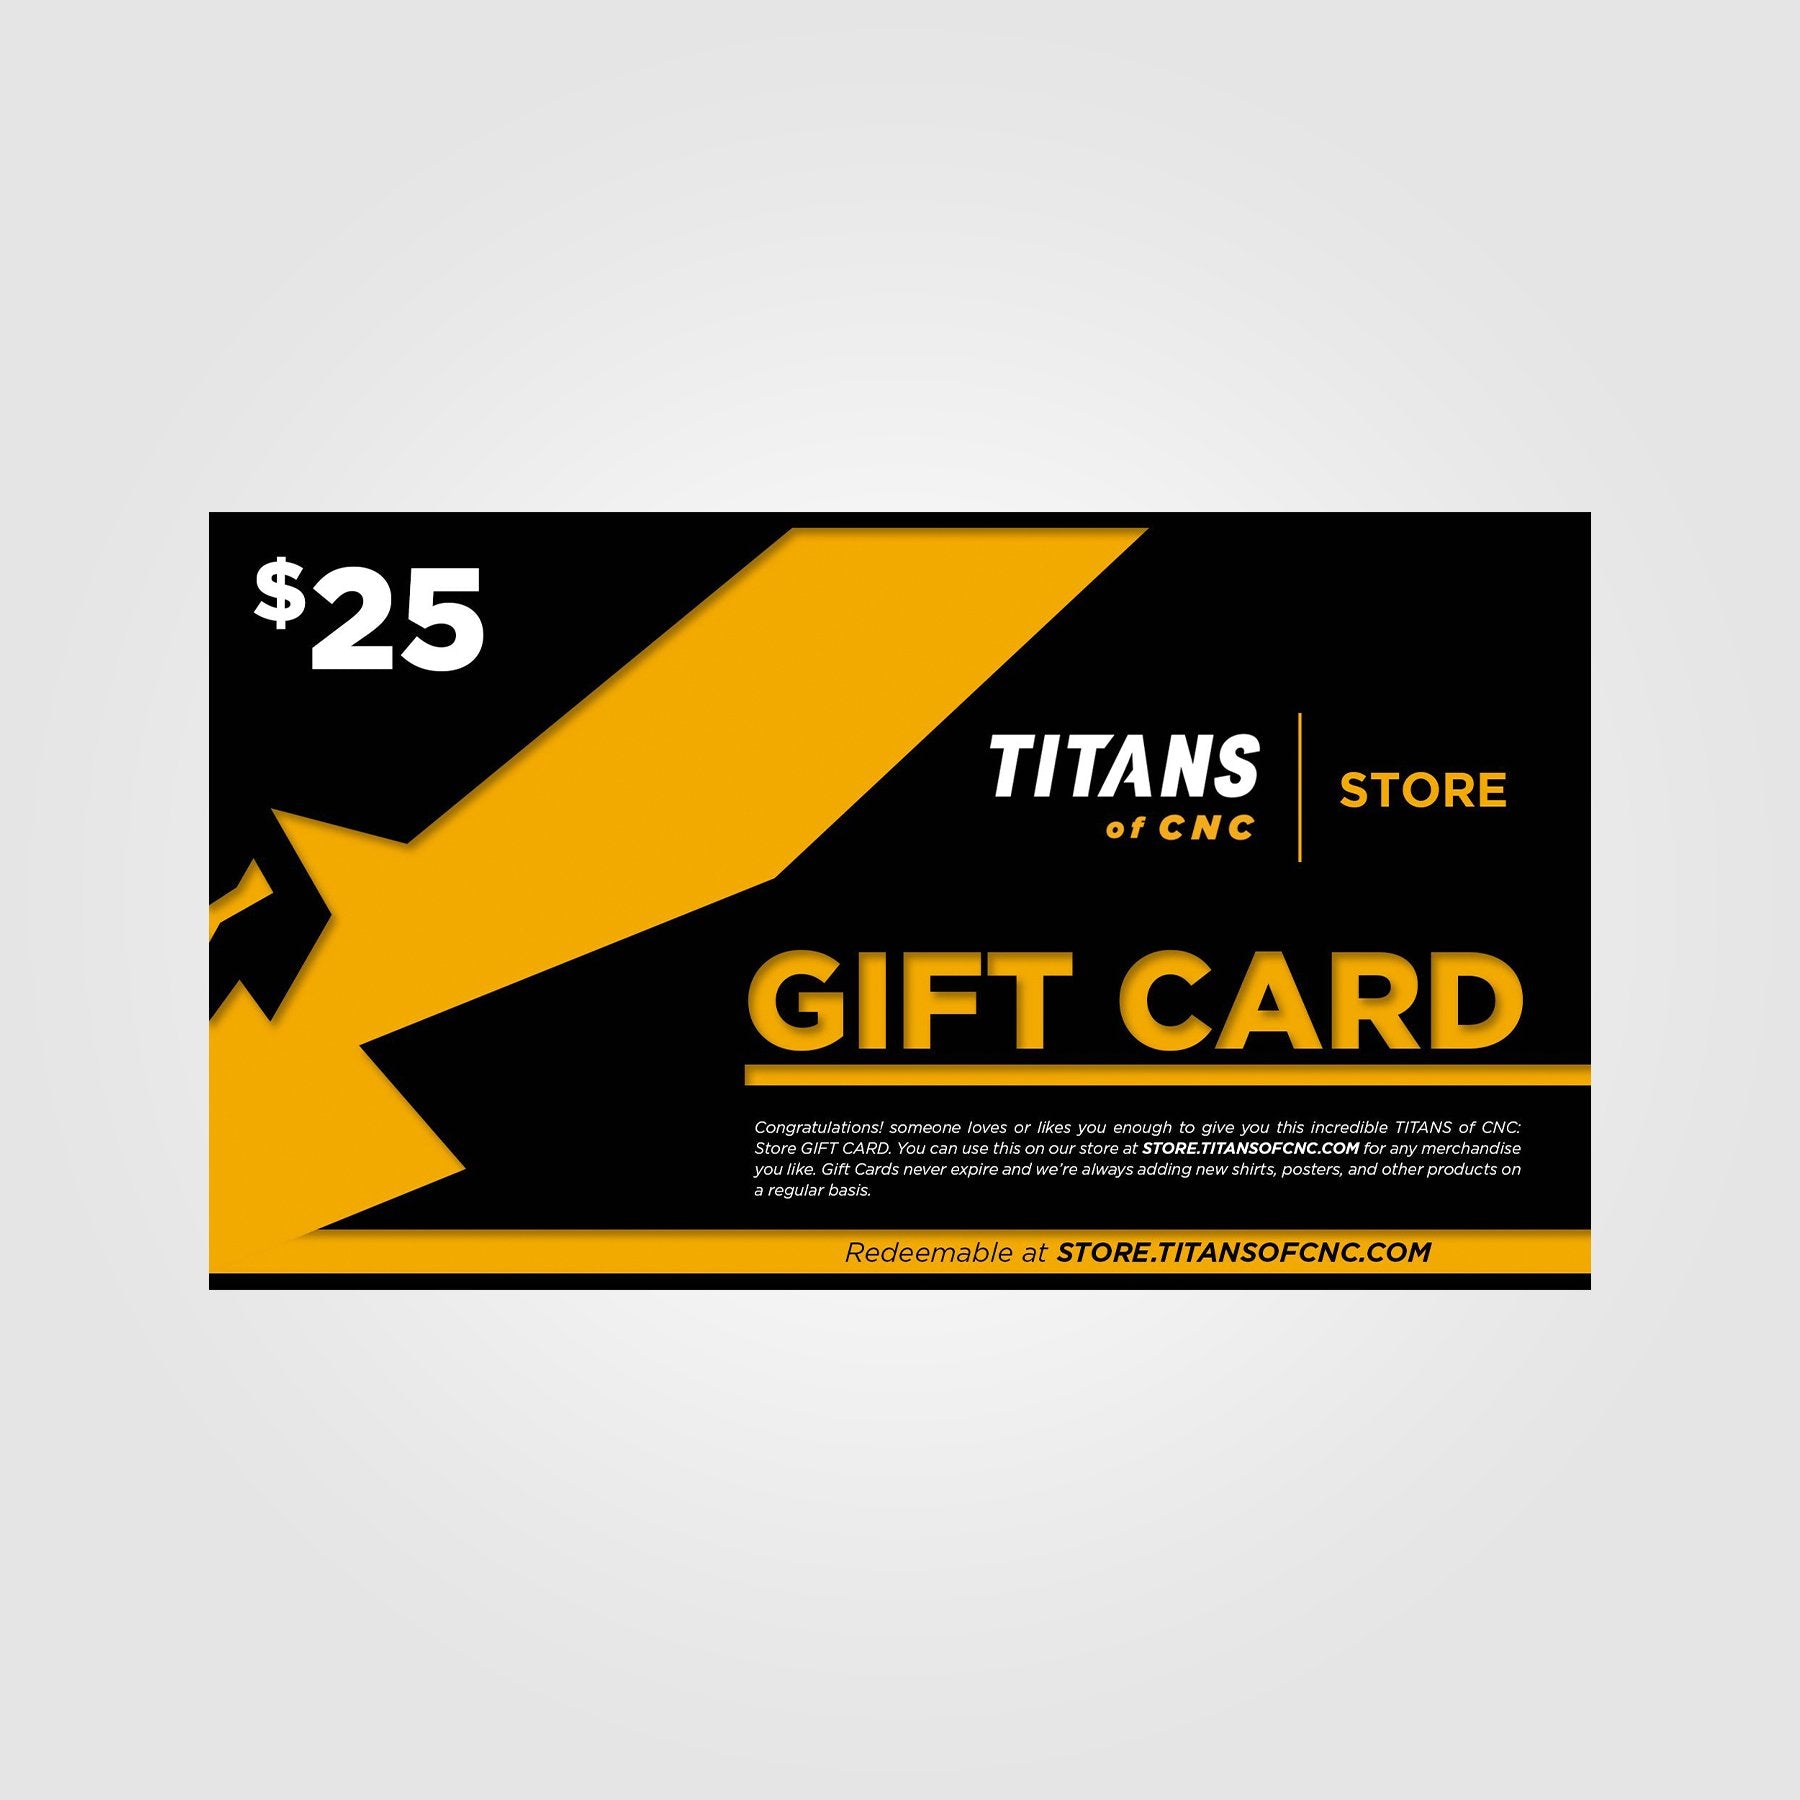 TITANS of CNC Gift Card